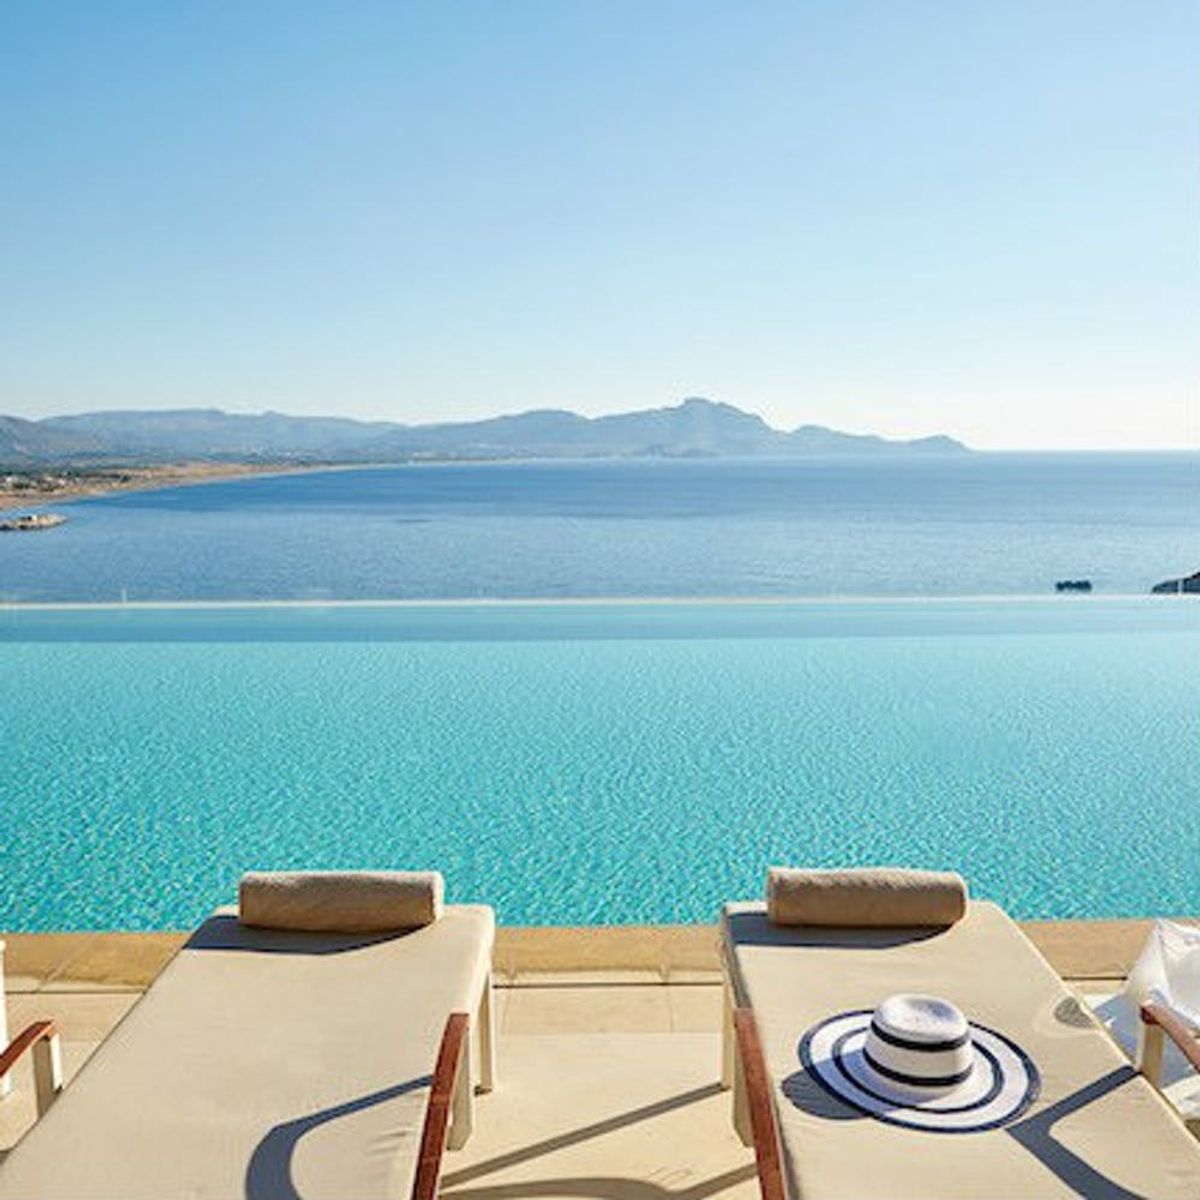 The 11 Most Luxurious Hotels in the World Will Make You Swoon